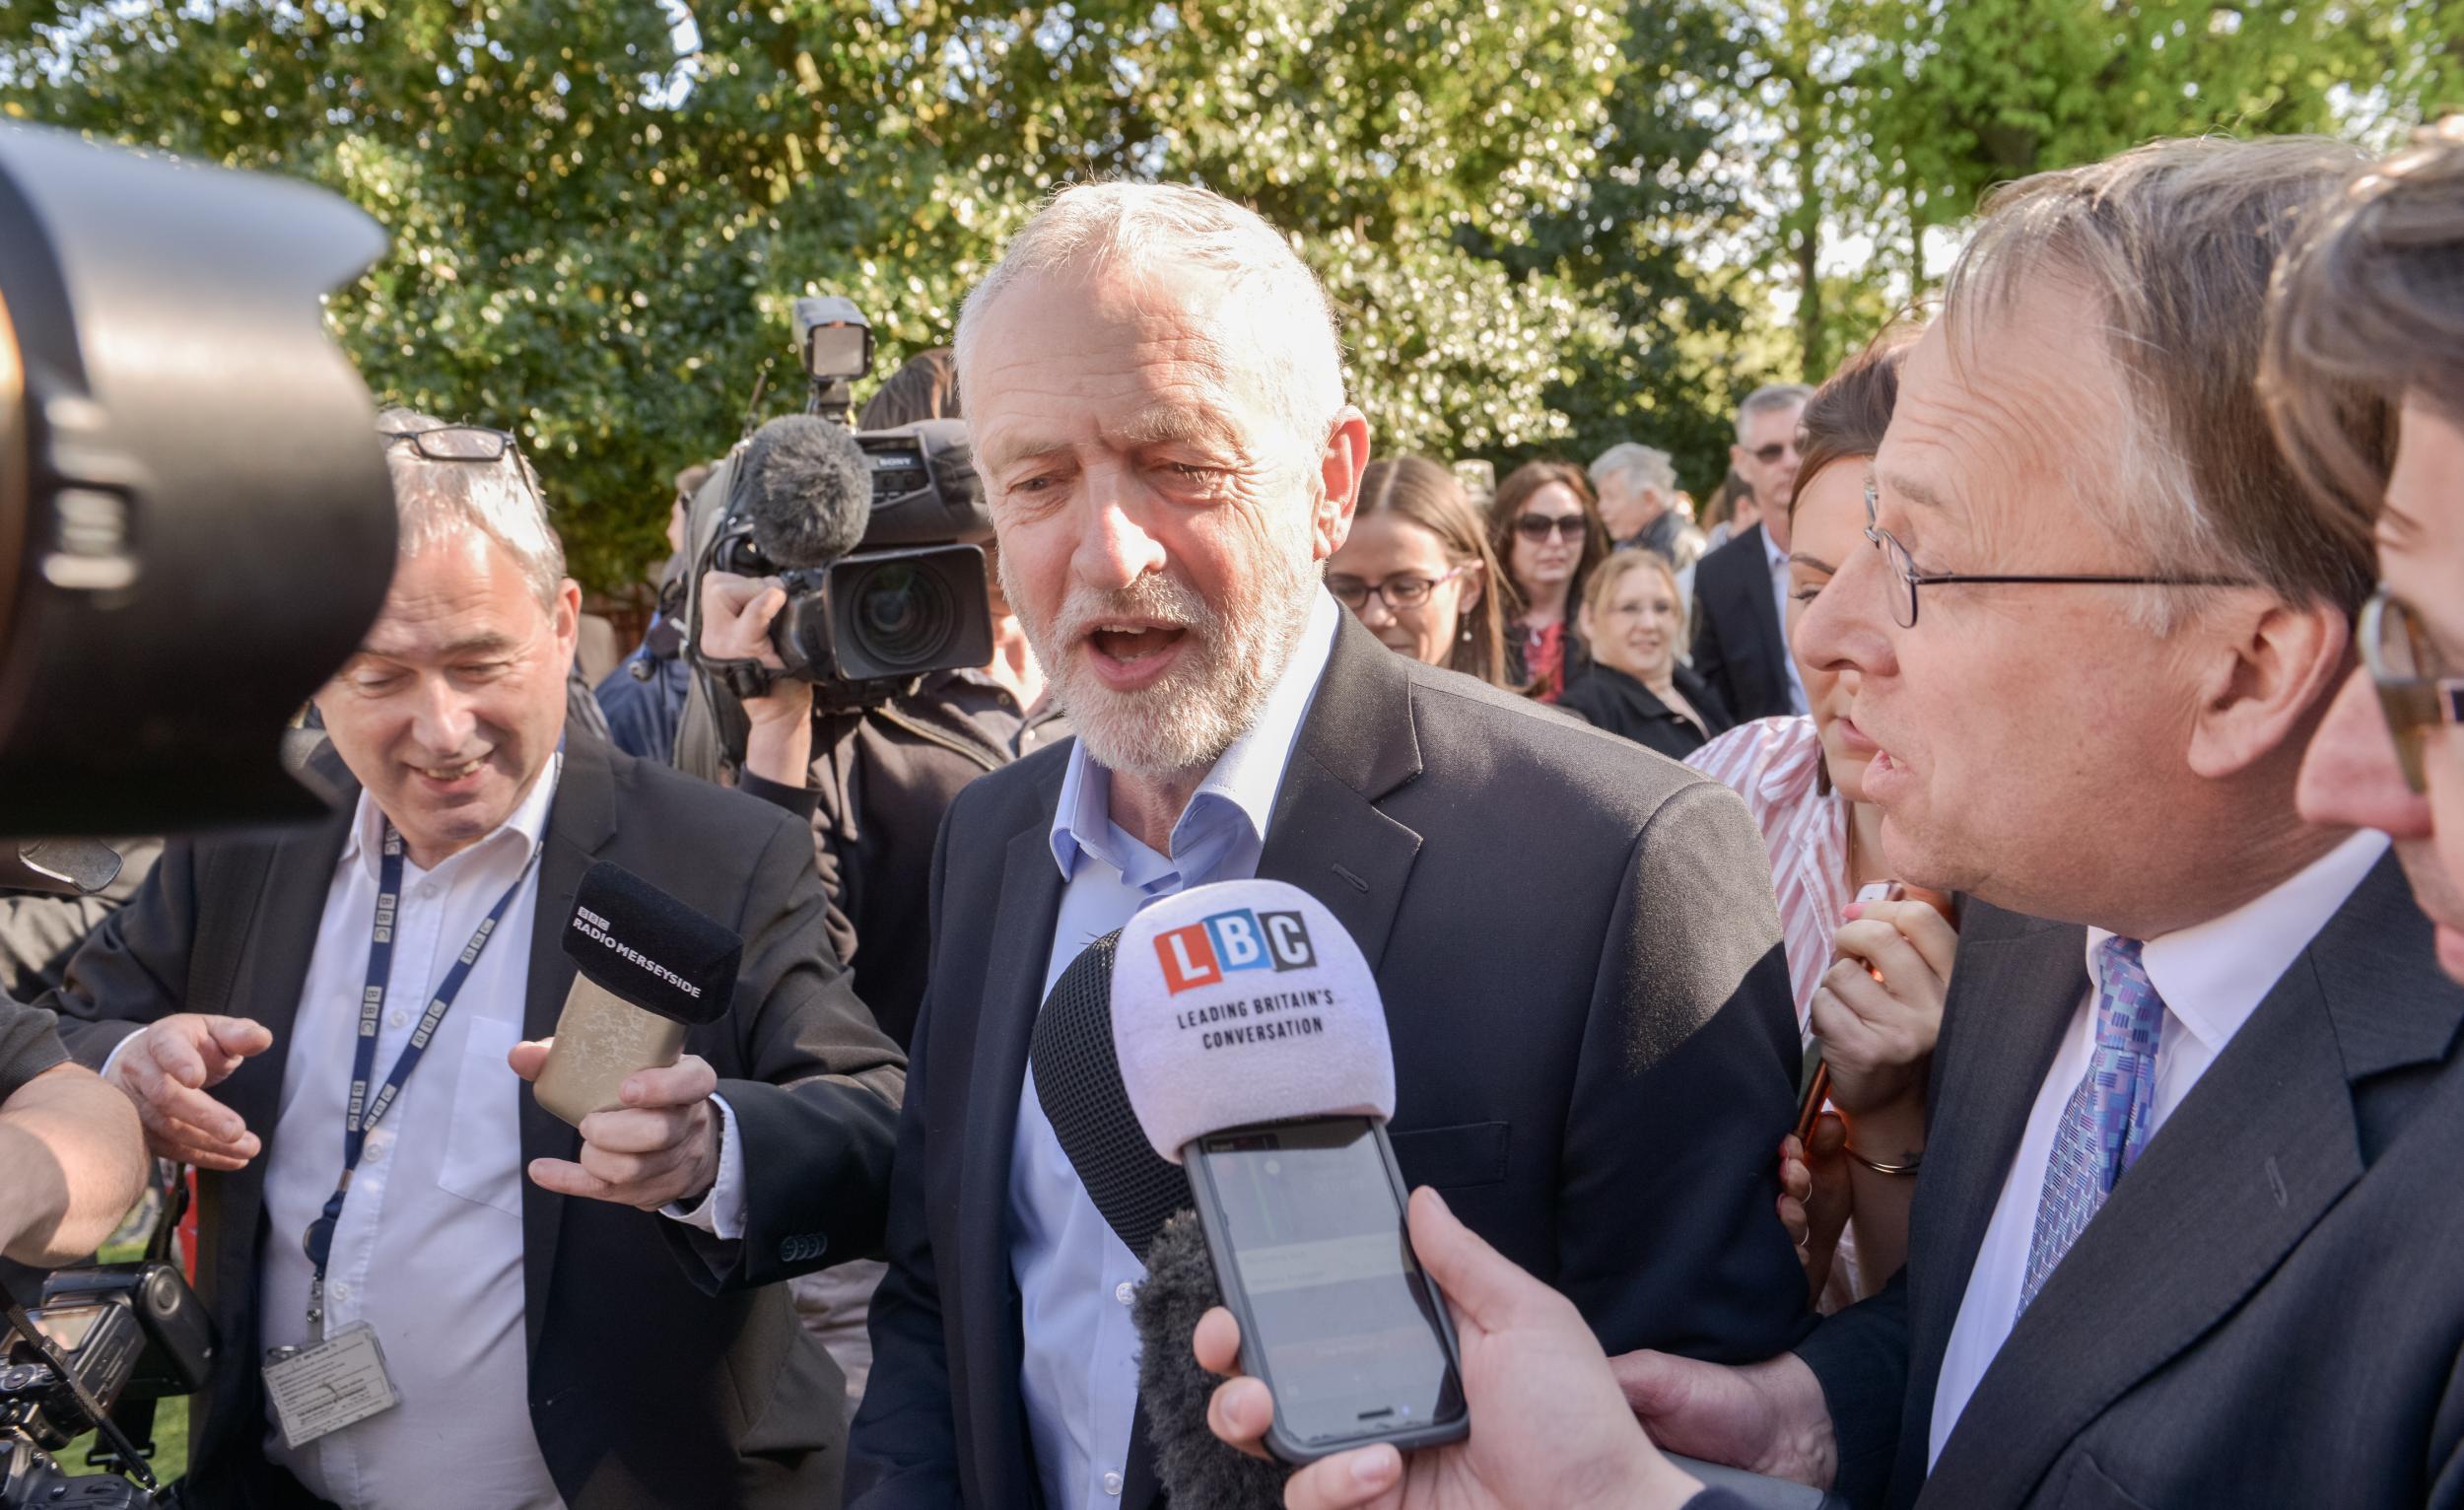 Labour leader Jeremy Corbyn in Liverpool after his party won the mayoralty there